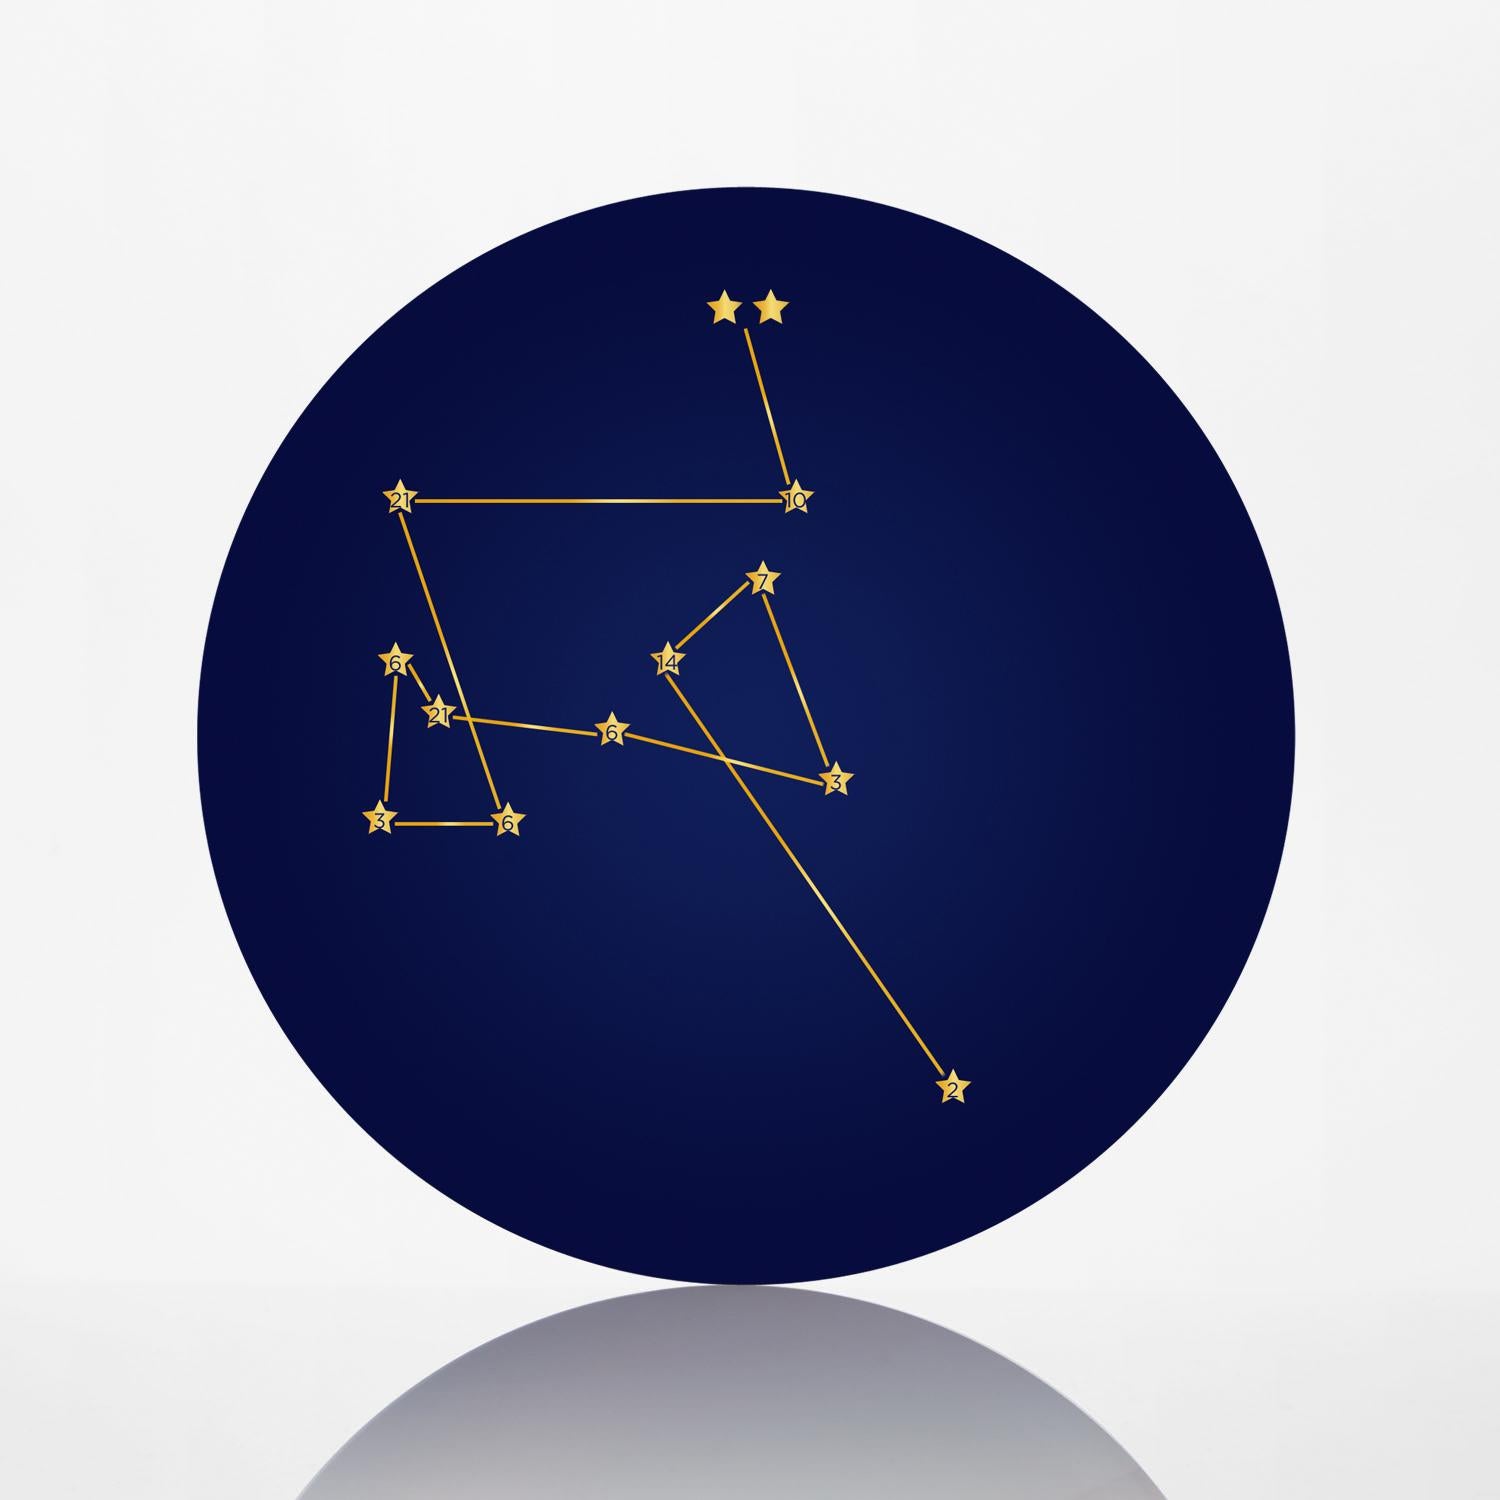 Poetic creation with constellations of stars. A tribute to the different goals of the French team.
Fine porcelain Bleu de four, a special production of porcelain from Limoges. Serigraphy and hand-painted gold, 24-carat.

Bleu de four is a